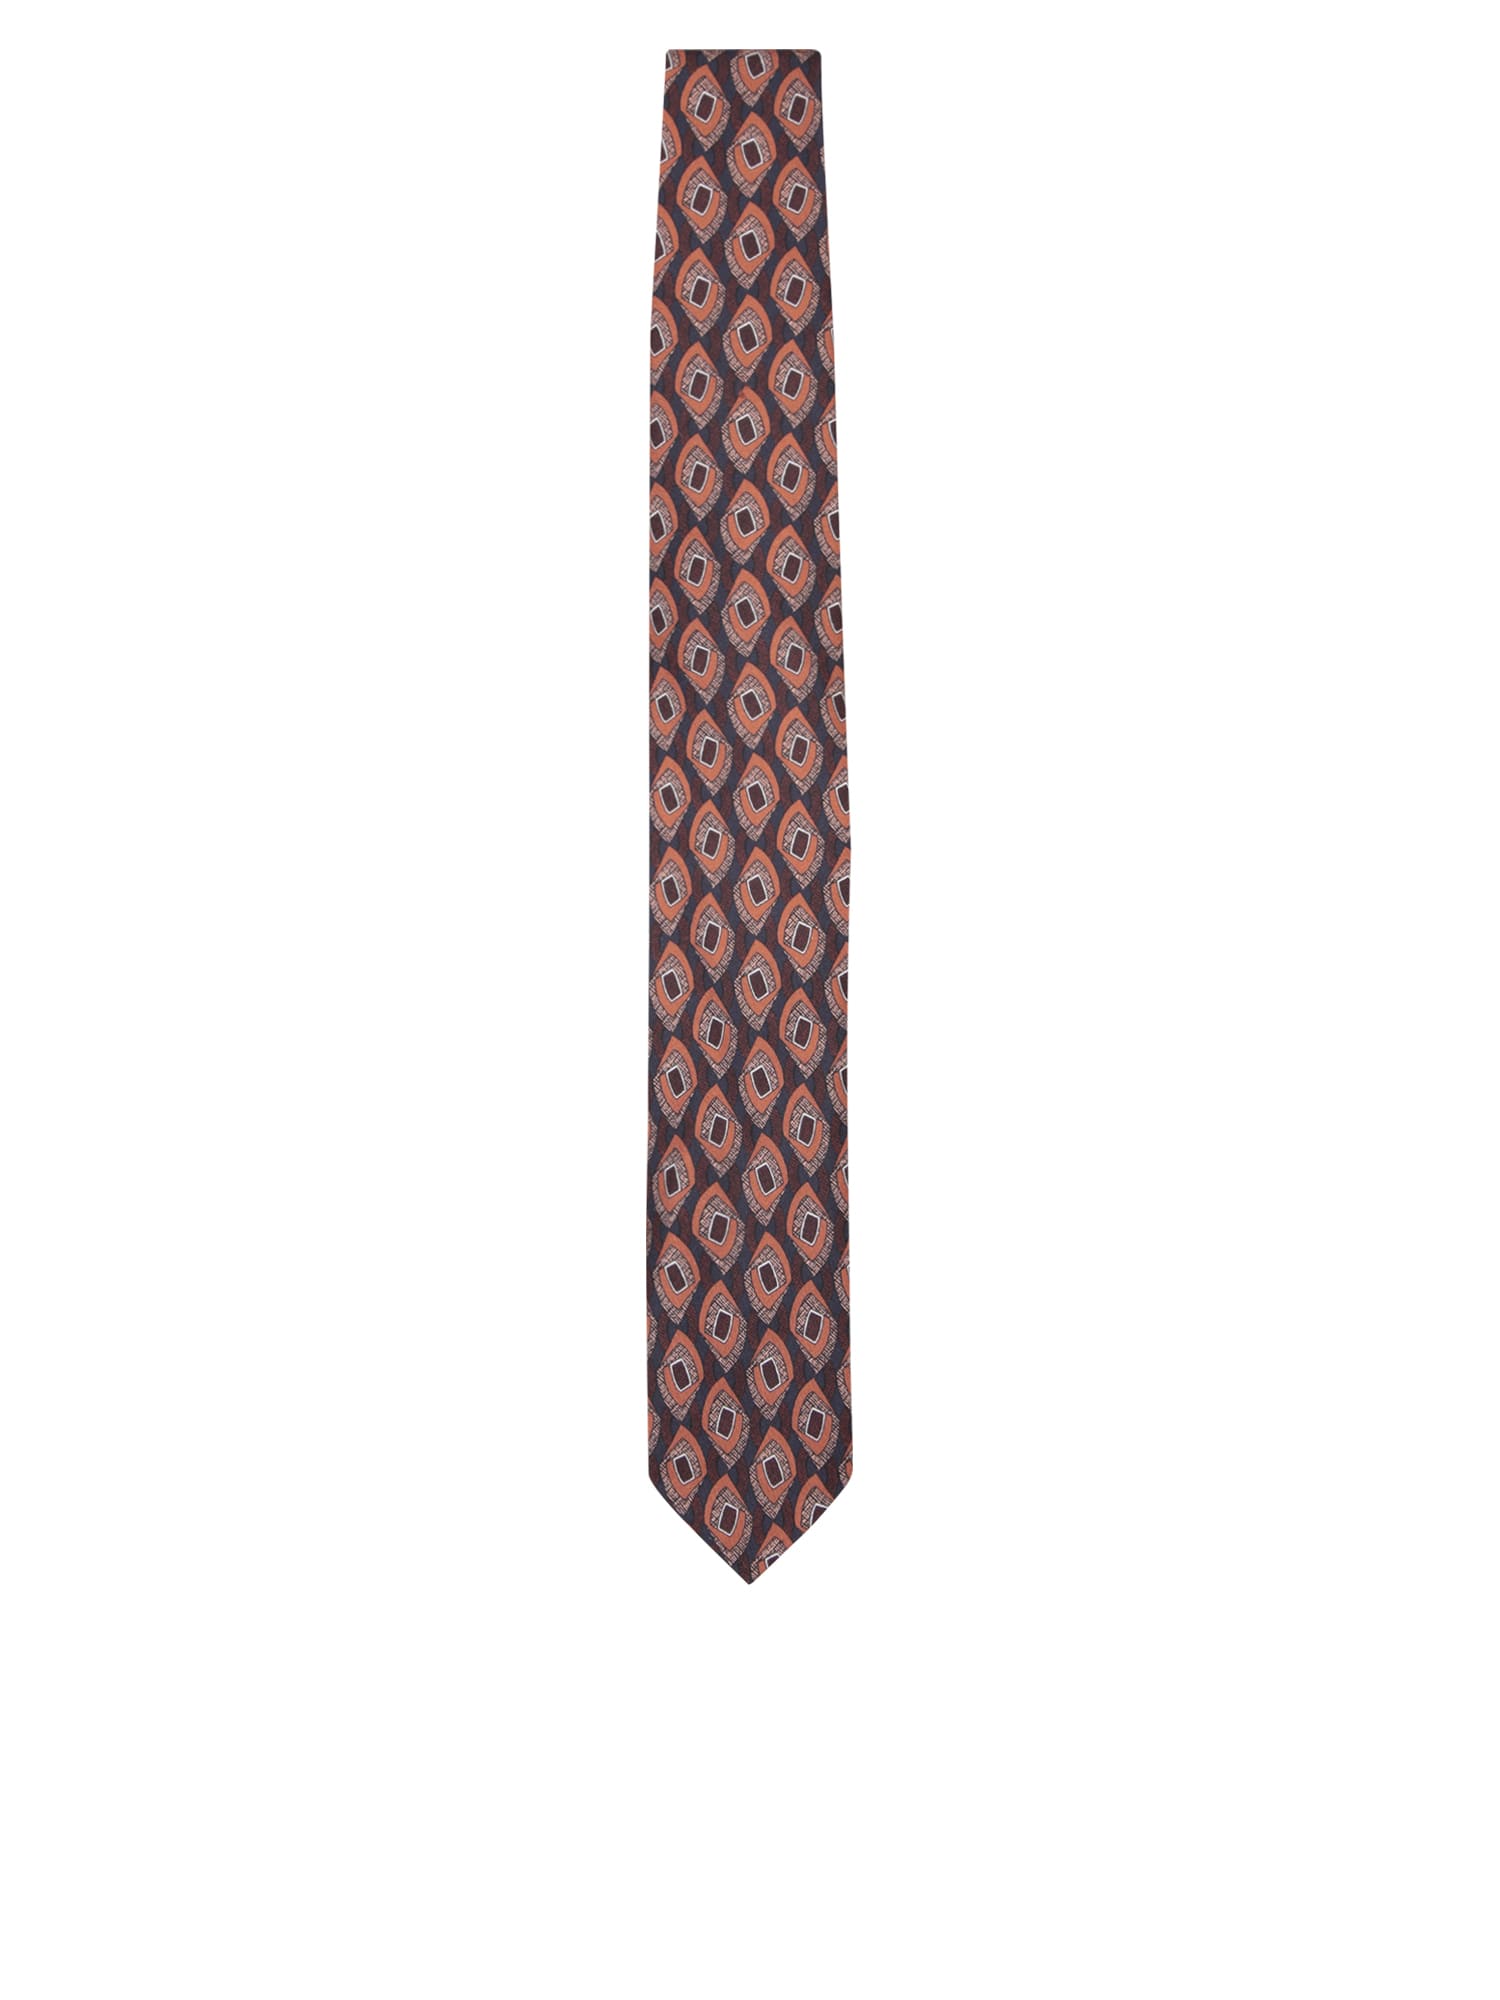 Silk Tie In Brown/red With Geometric Pattern